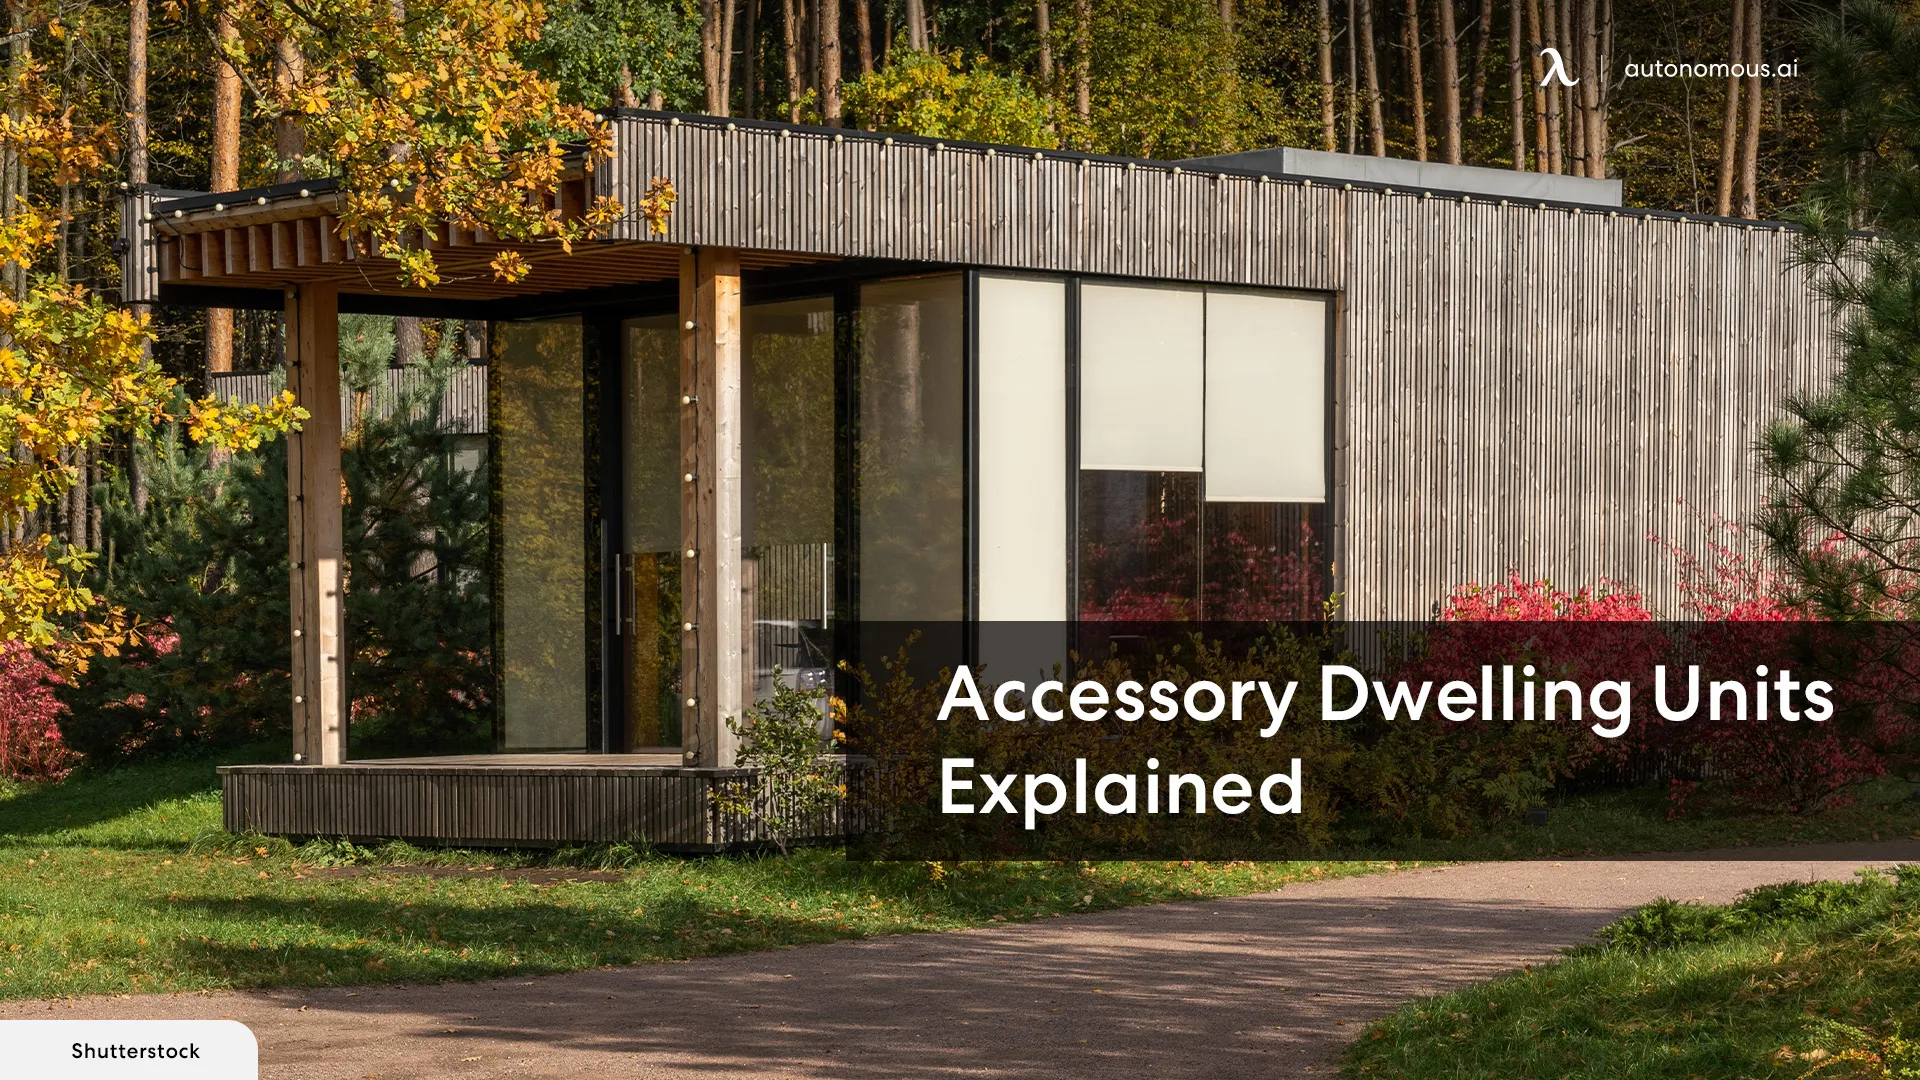 All About ADU - Accessory Dwelling Units Explained